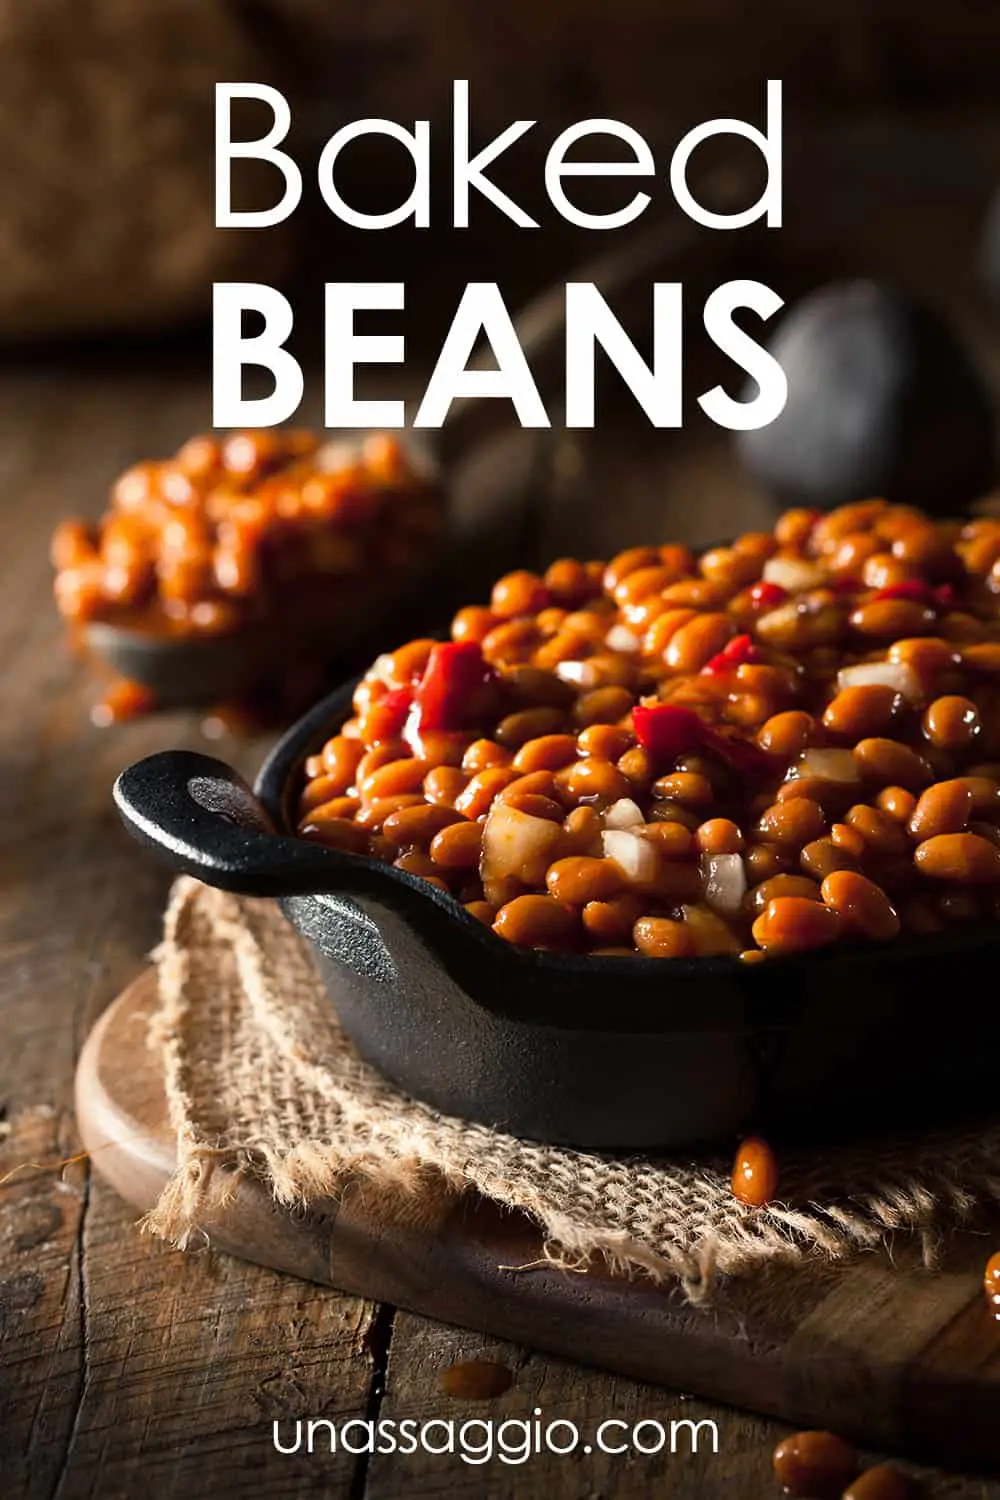 Baked beans recipe